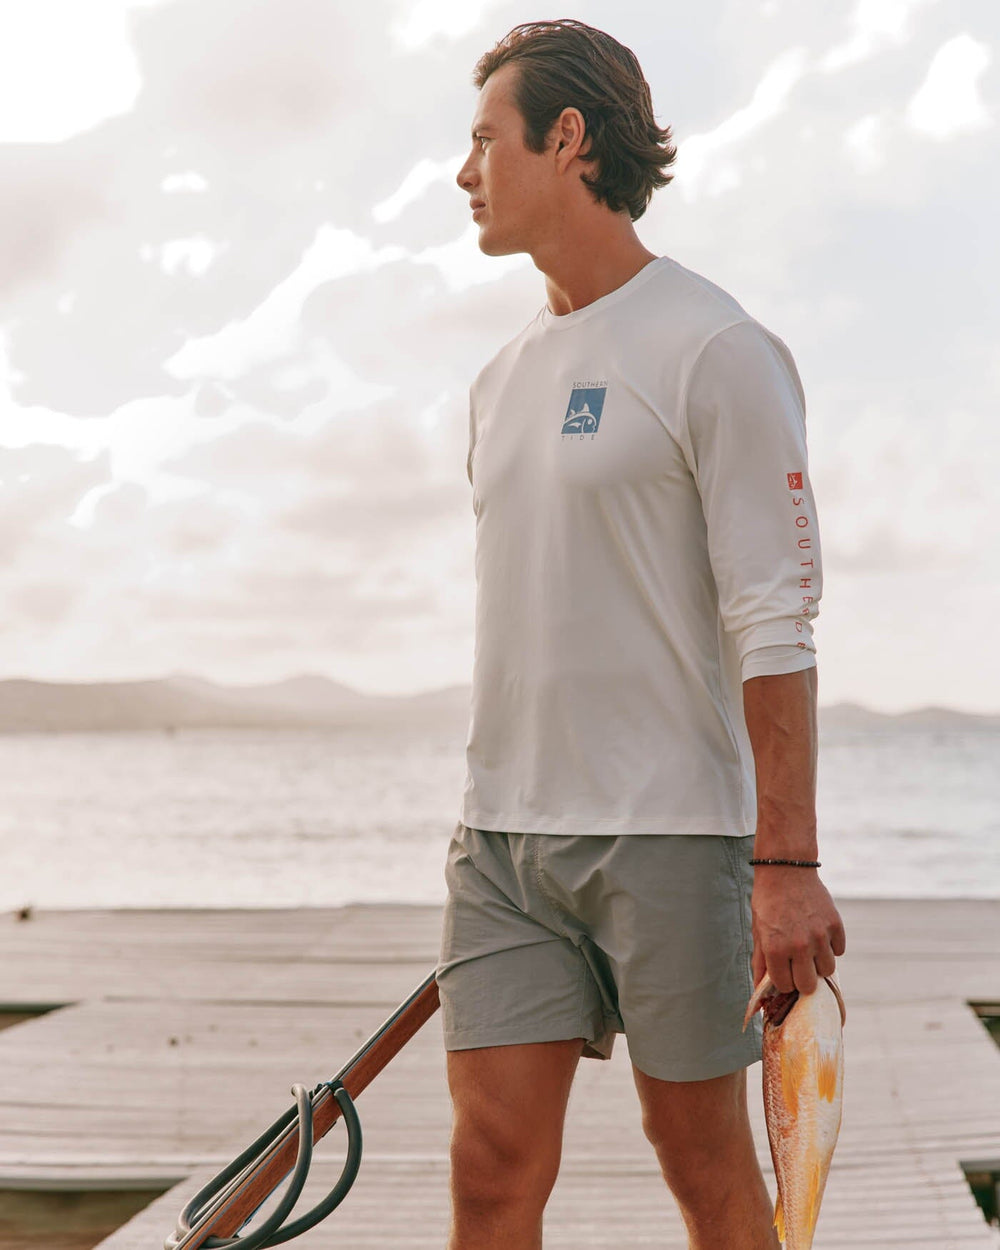 The front view of the Southern Tide Boxed Chest Performance Long Sleeve T-Shirt by Southern Tide - Sand White